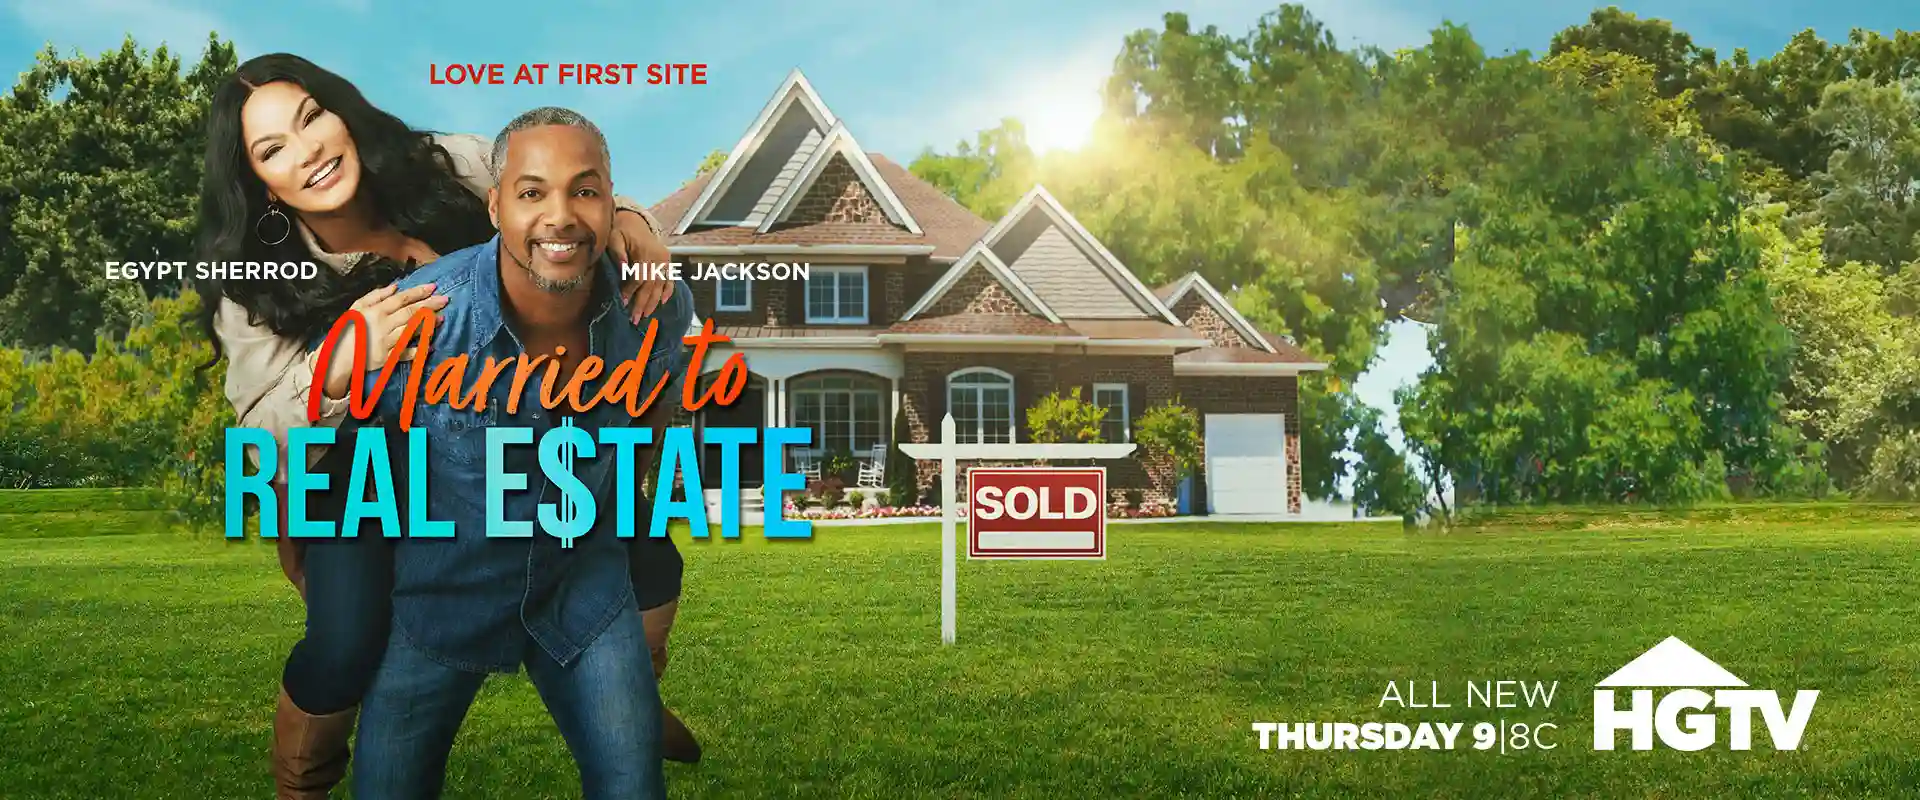 HGTV's Married to Real Estate